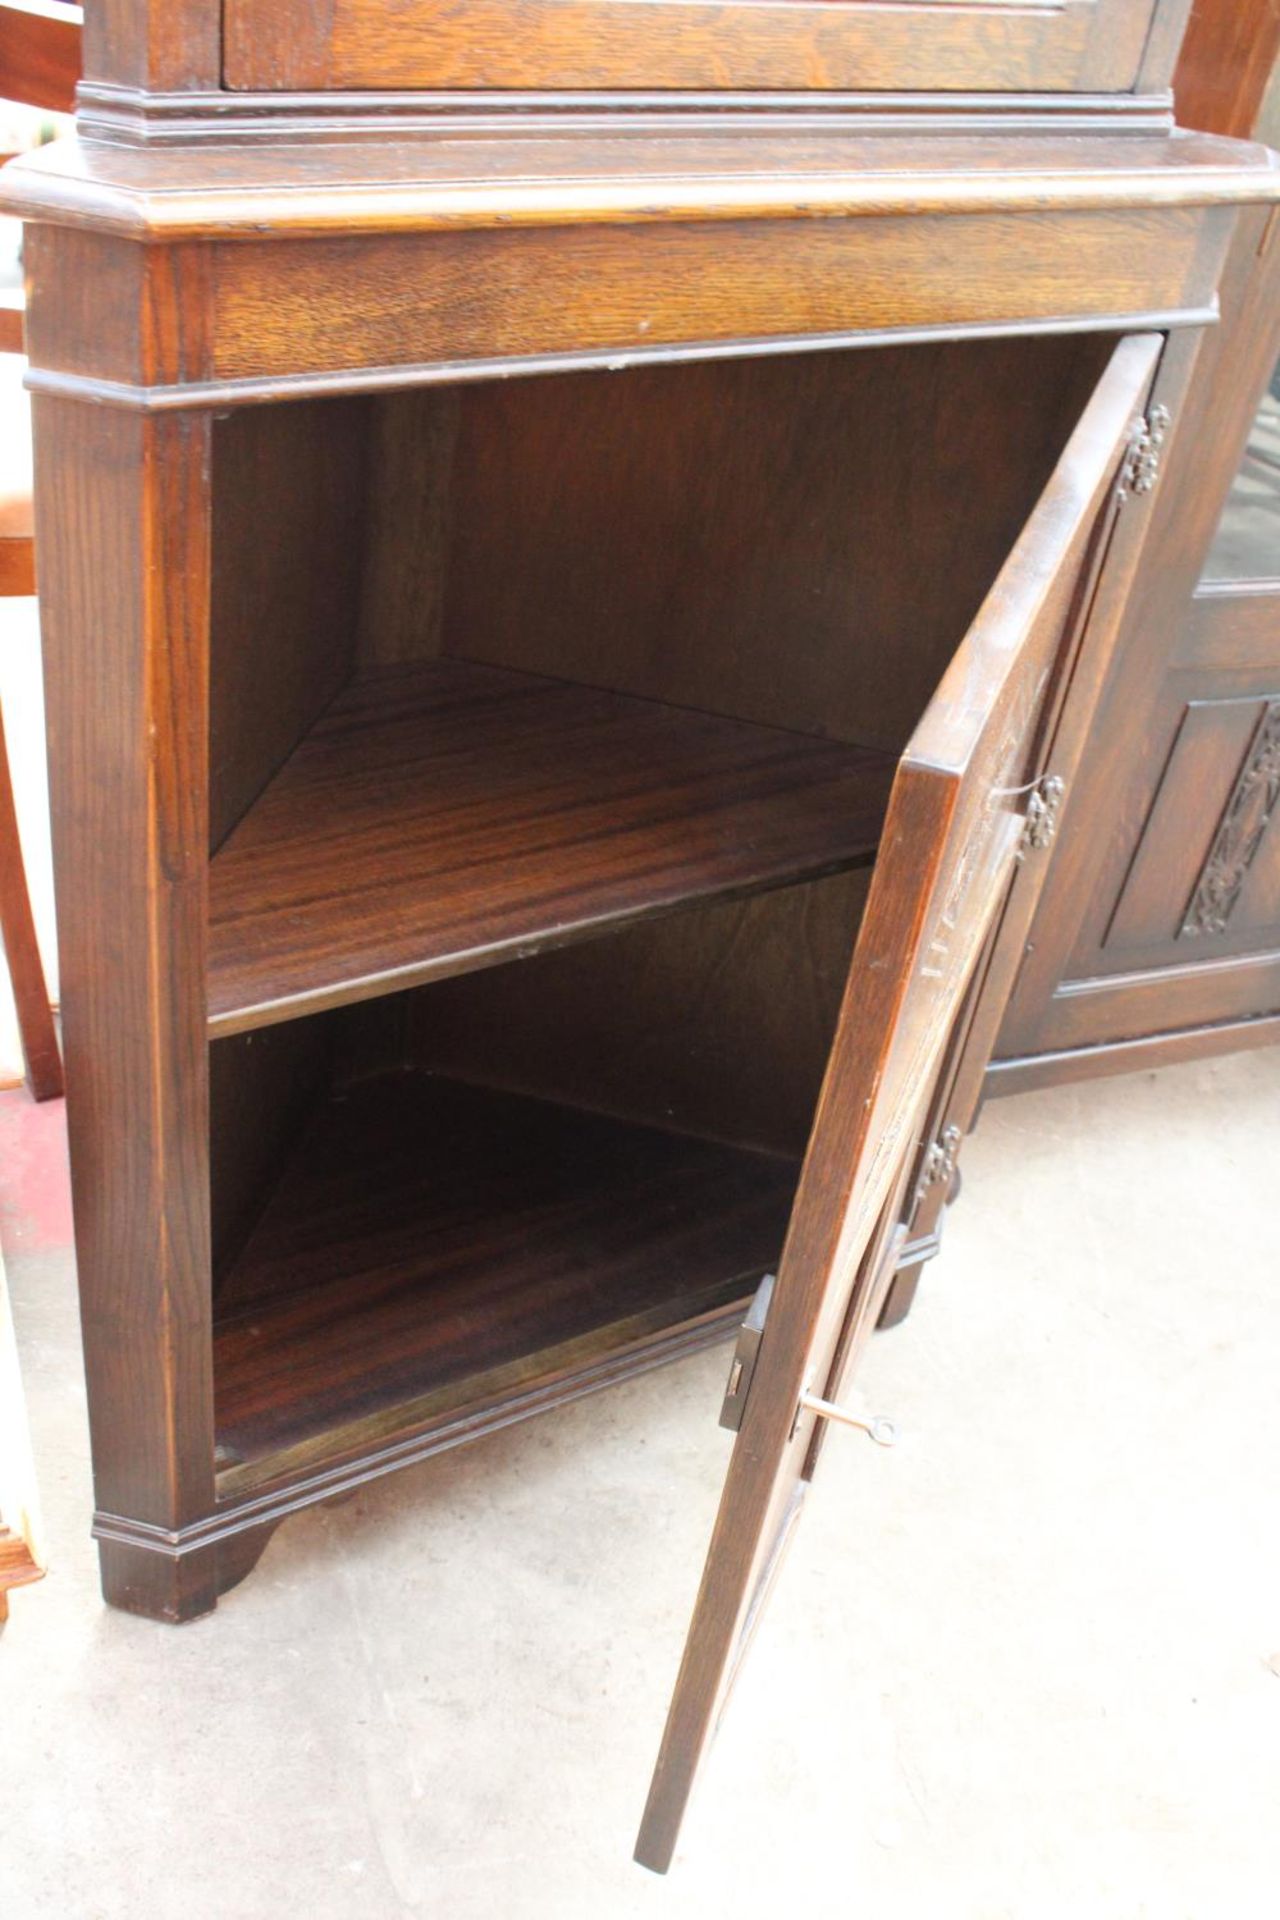 A MODERN OAK CORNER CUPBOARD WITH GLAZED AND LEADED UPPER PORTION - Image 4 of 5